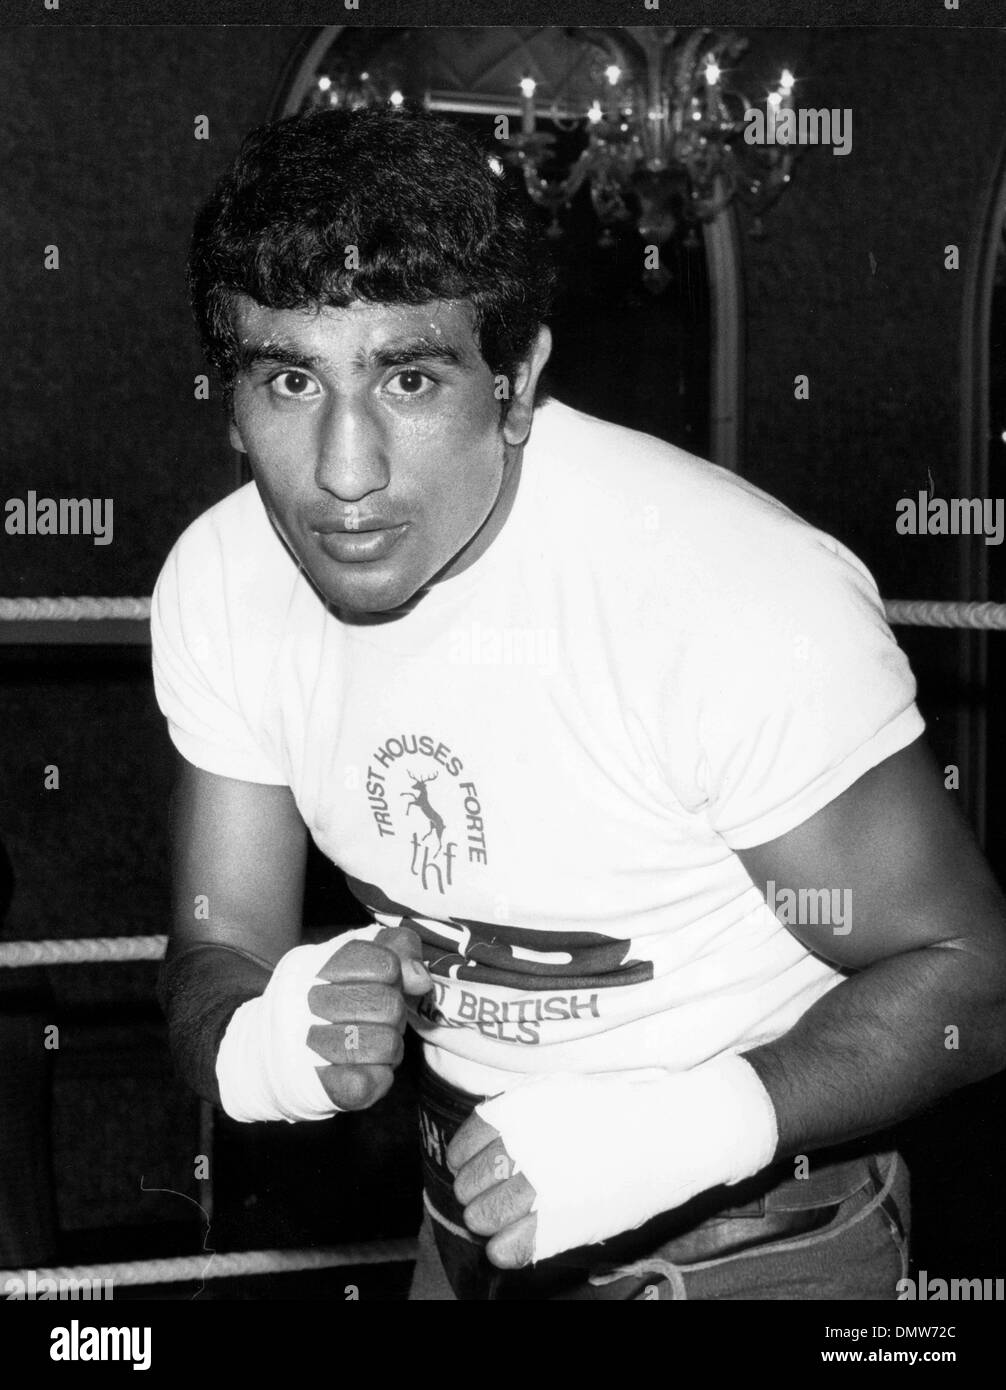 Aug 28, 1974; London, UK; The Argentine boxer, JORGE AHUMADA, who has arrived in London to fight Britain's John Conteh for the vacant world light heavy weight championship at Wembley on September 10th. had a publlic work out at the Cafe Royal. (Credit Image: © KEYSTONE Pictures USA) Stock Photo